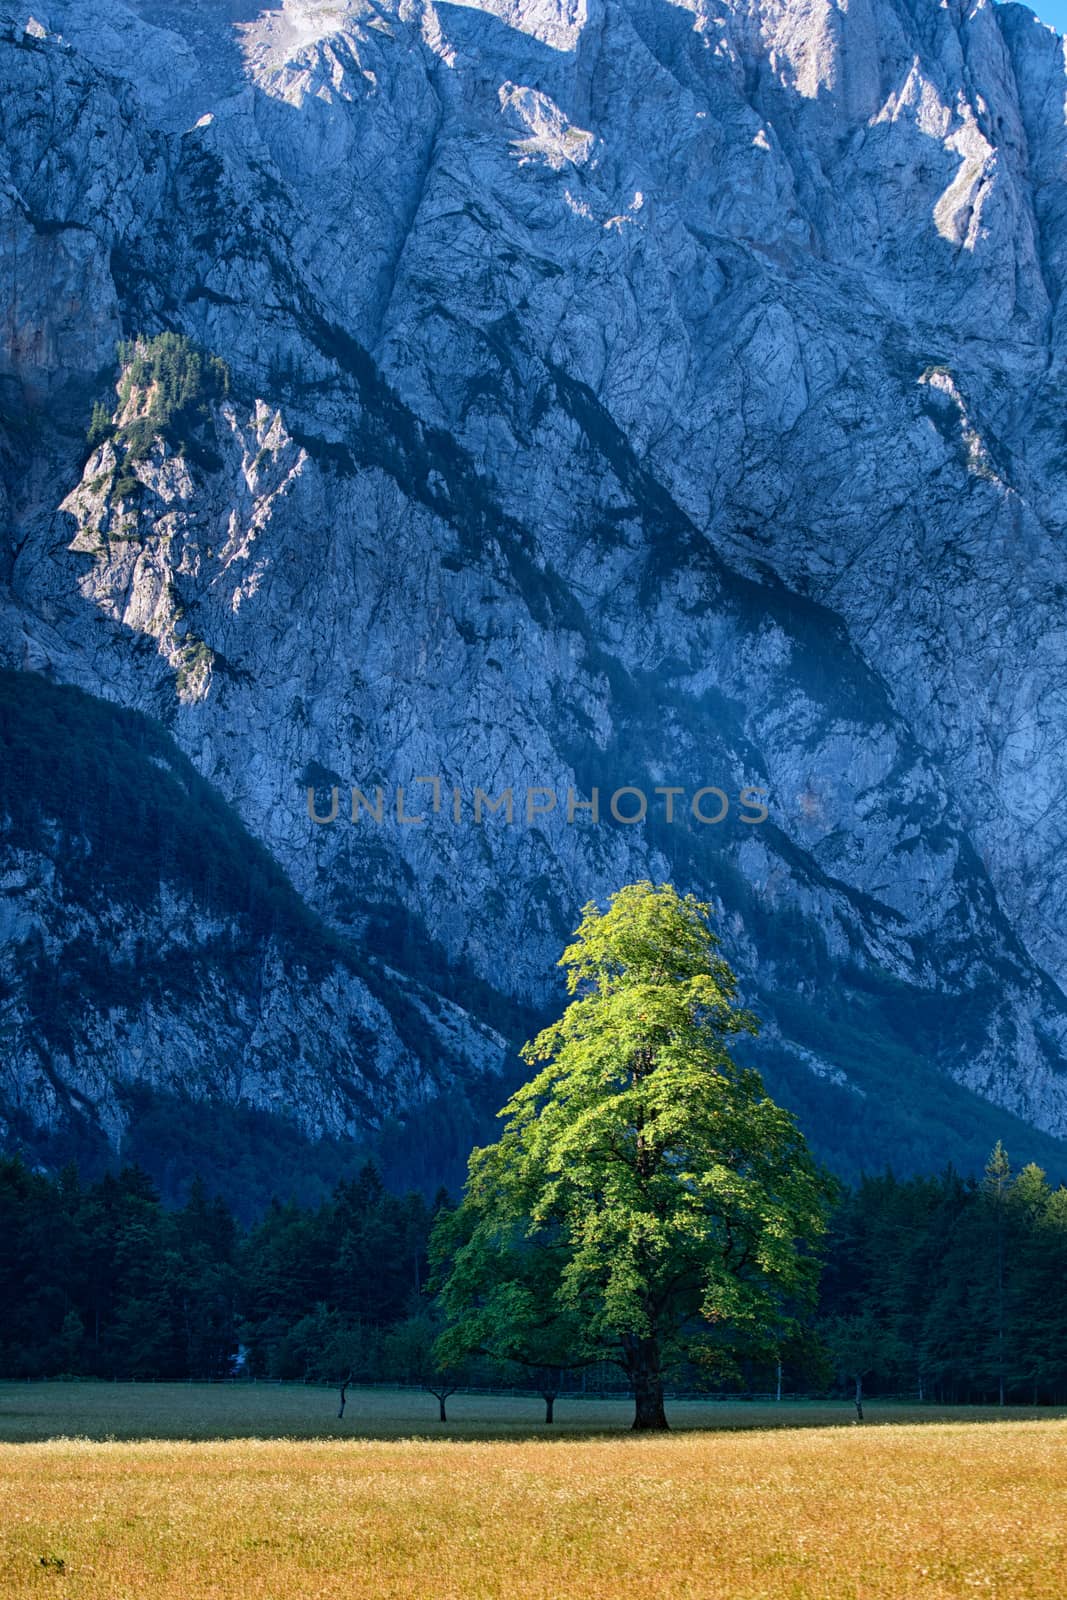 Elm tree on meadow, lit by beautiful sunrise with blue mountains in background in Logarska dolina, Logar valley, Slovenia